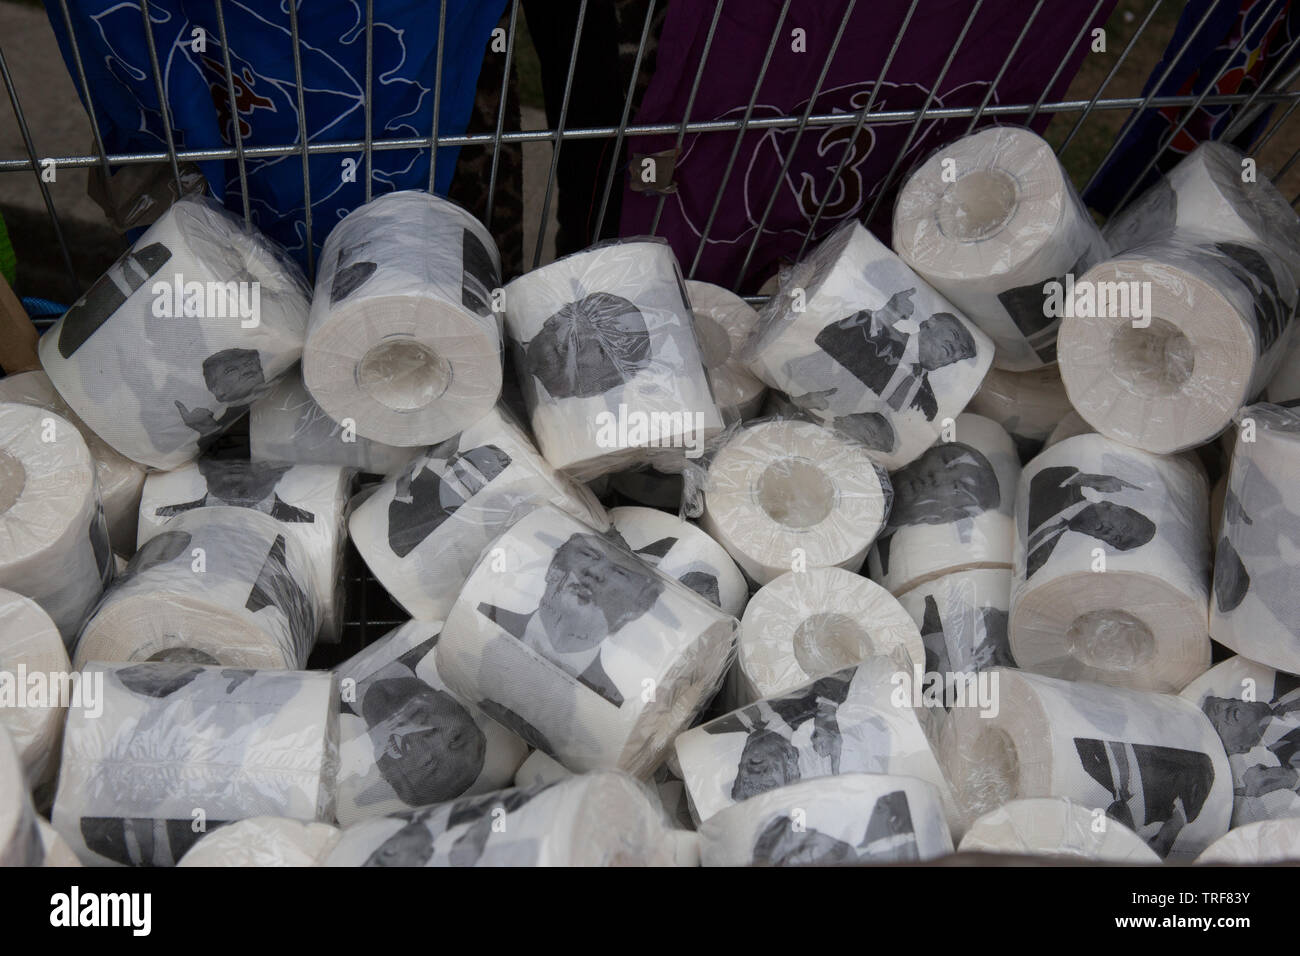 https://c8.alamy.com/comp/TRF83Y/printed-toilet-roll-of-president-trump-on-offer-in-parliament-square-TRF83Y.jpg